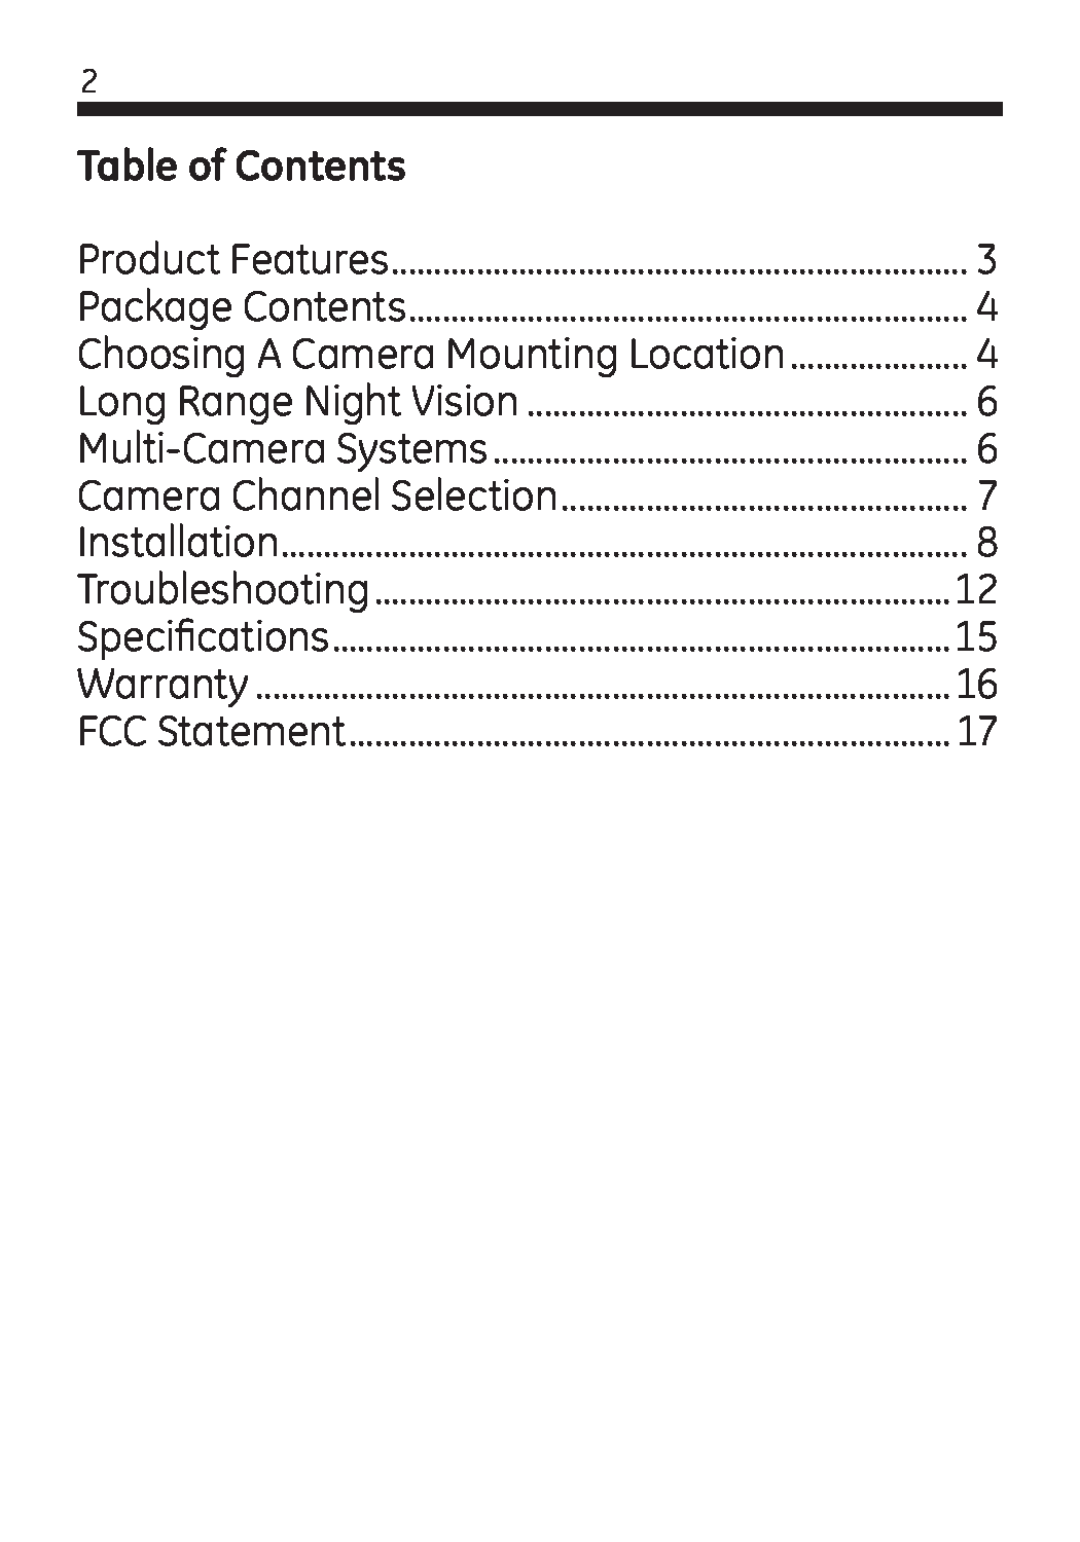 Jasco 45245 user manual Table of Contents, Choosing A Camera Mounting Location, Camera Channel Selection 